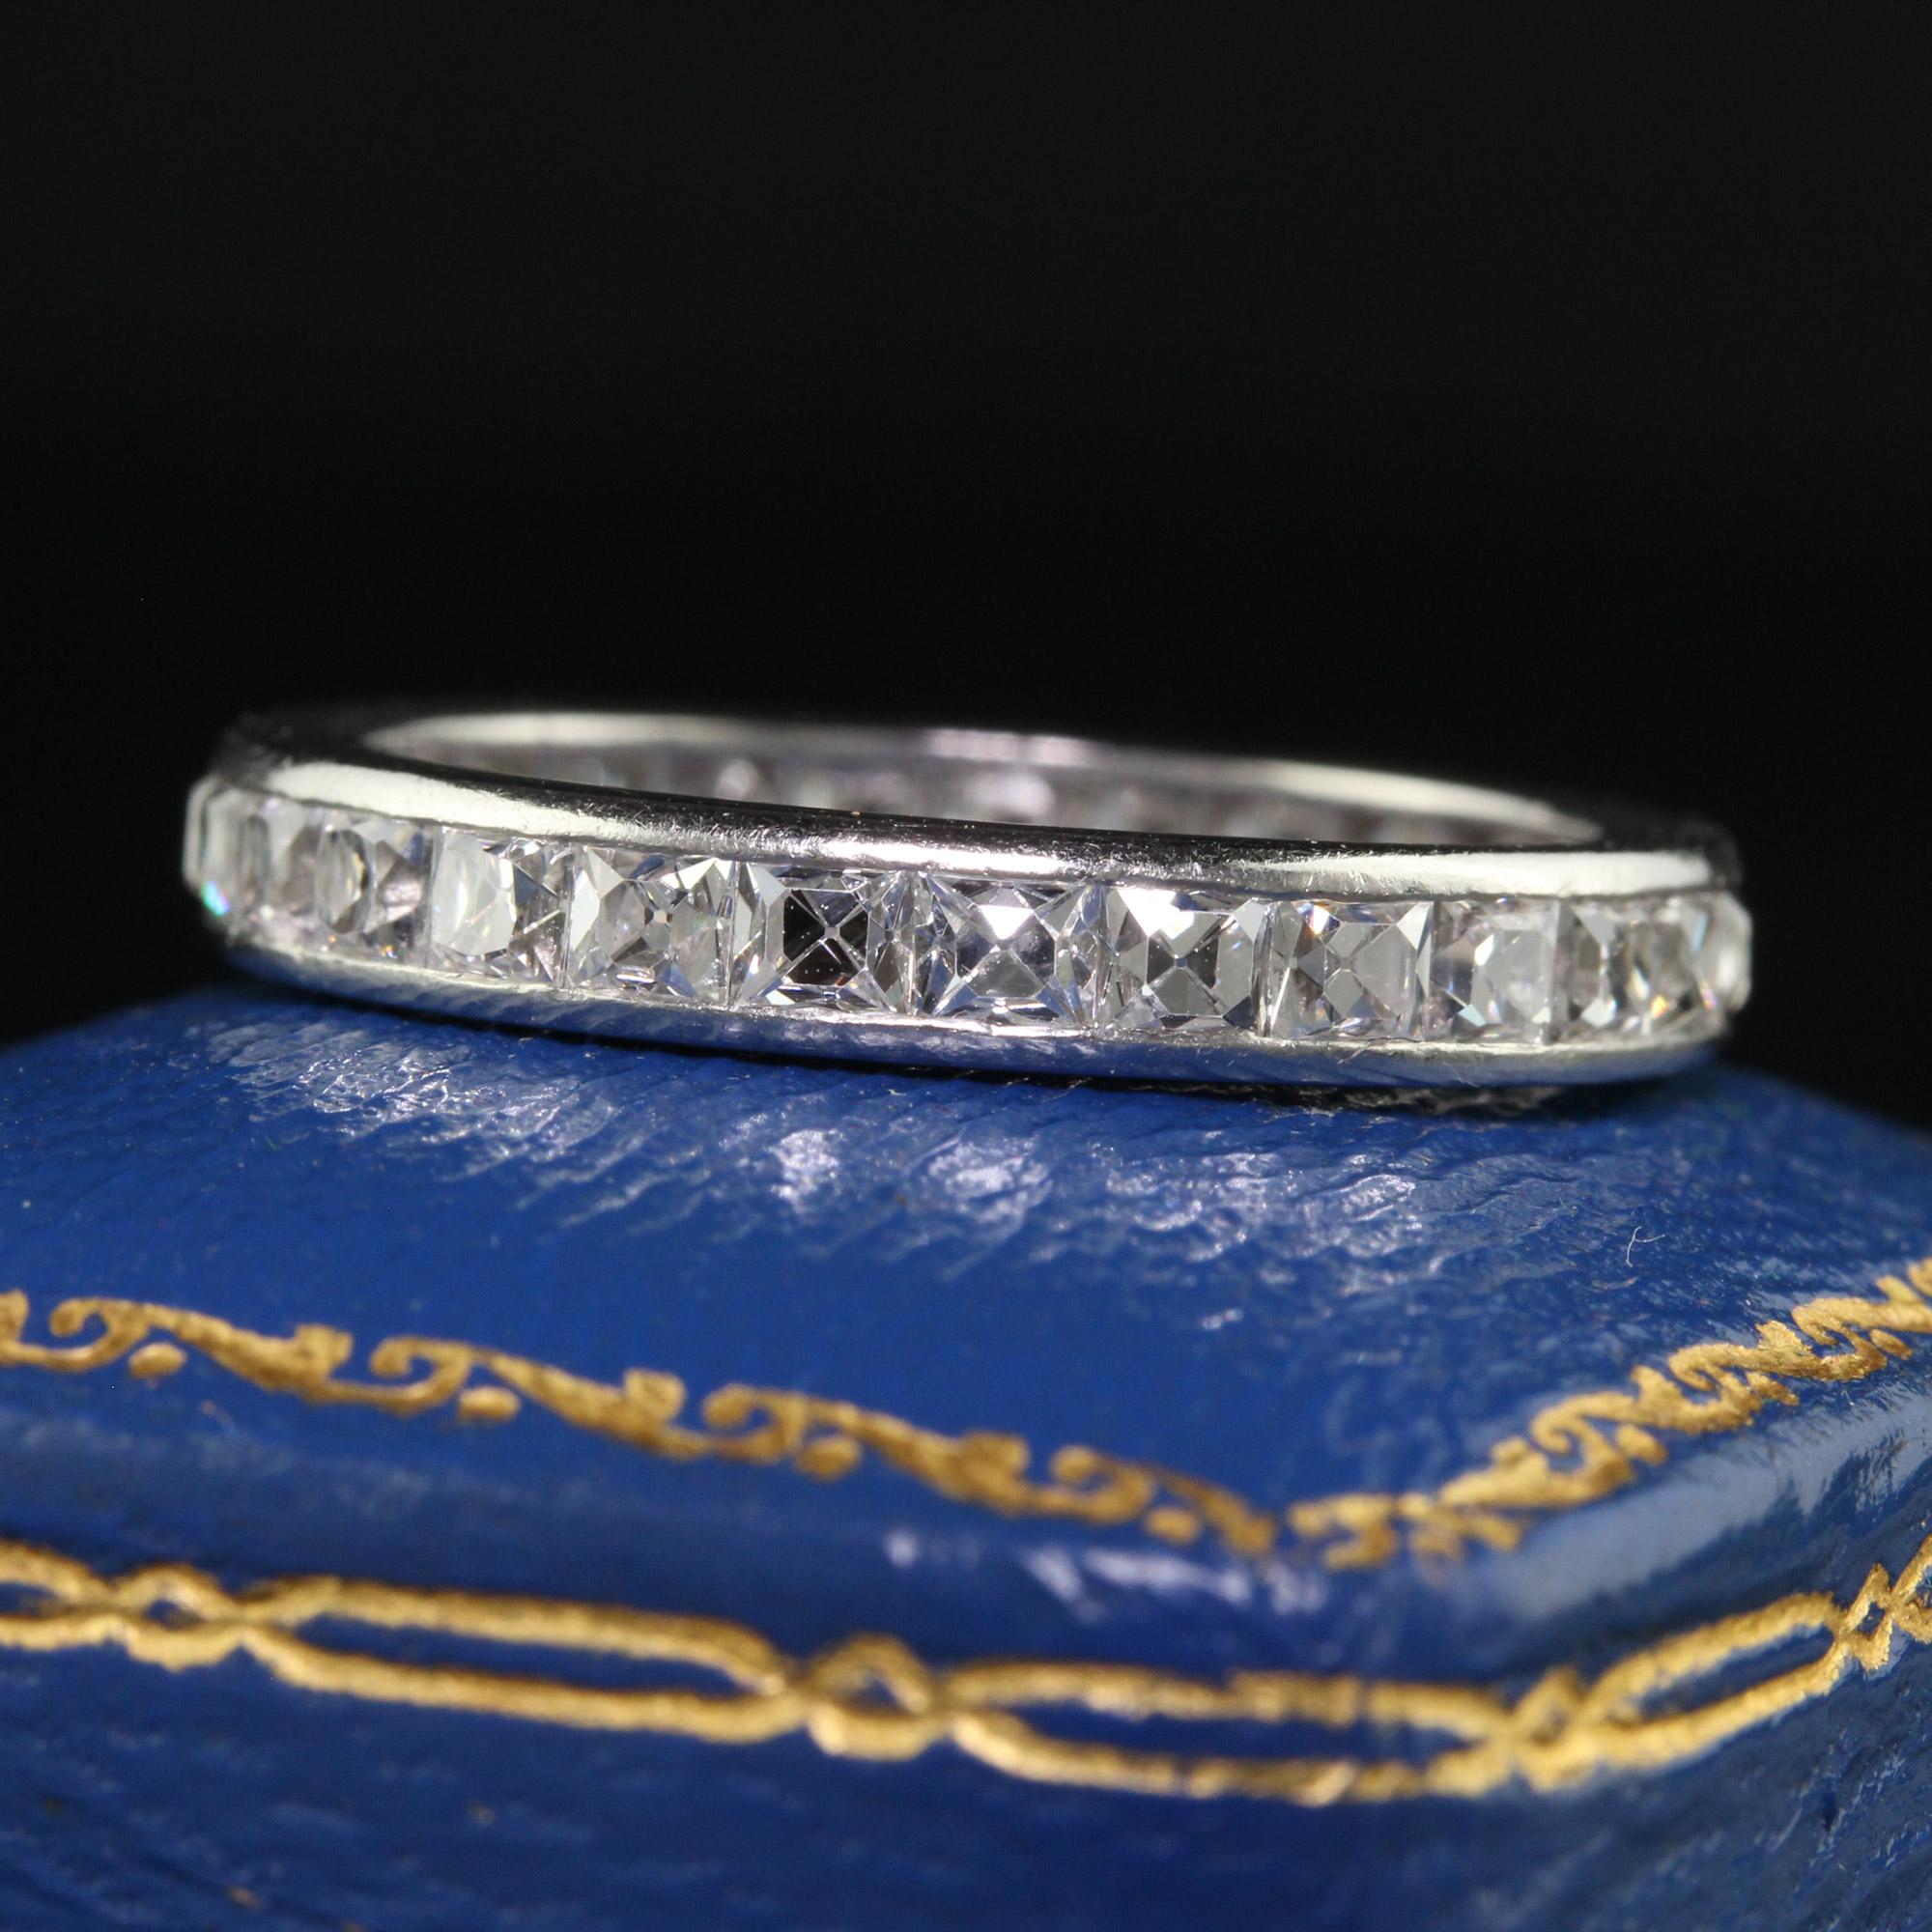 Beautiful Antique Art Deco Tiffany and Co Platinum French Cut Diamond Eternity Band. This incredible art deco Tiffany and Co eternity band is crafted in platinum. The ring has bright chunky French cut diamonds going around the entire ring. The